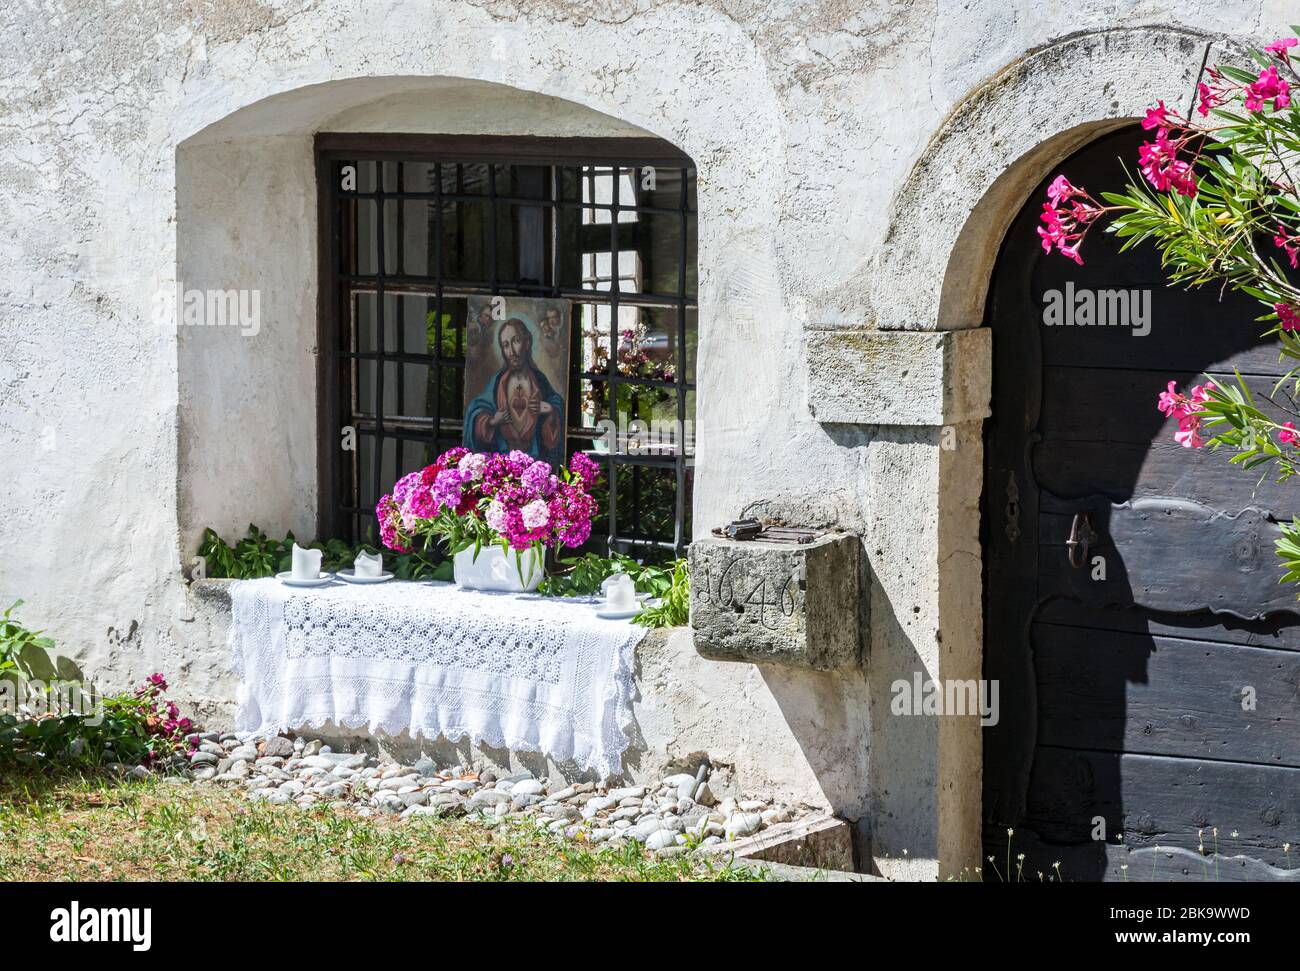 Window decorated with flower vase for the festivities of Corpus Christi in South Tyrol, Trentino Alto Adige, Italy Stock Photo